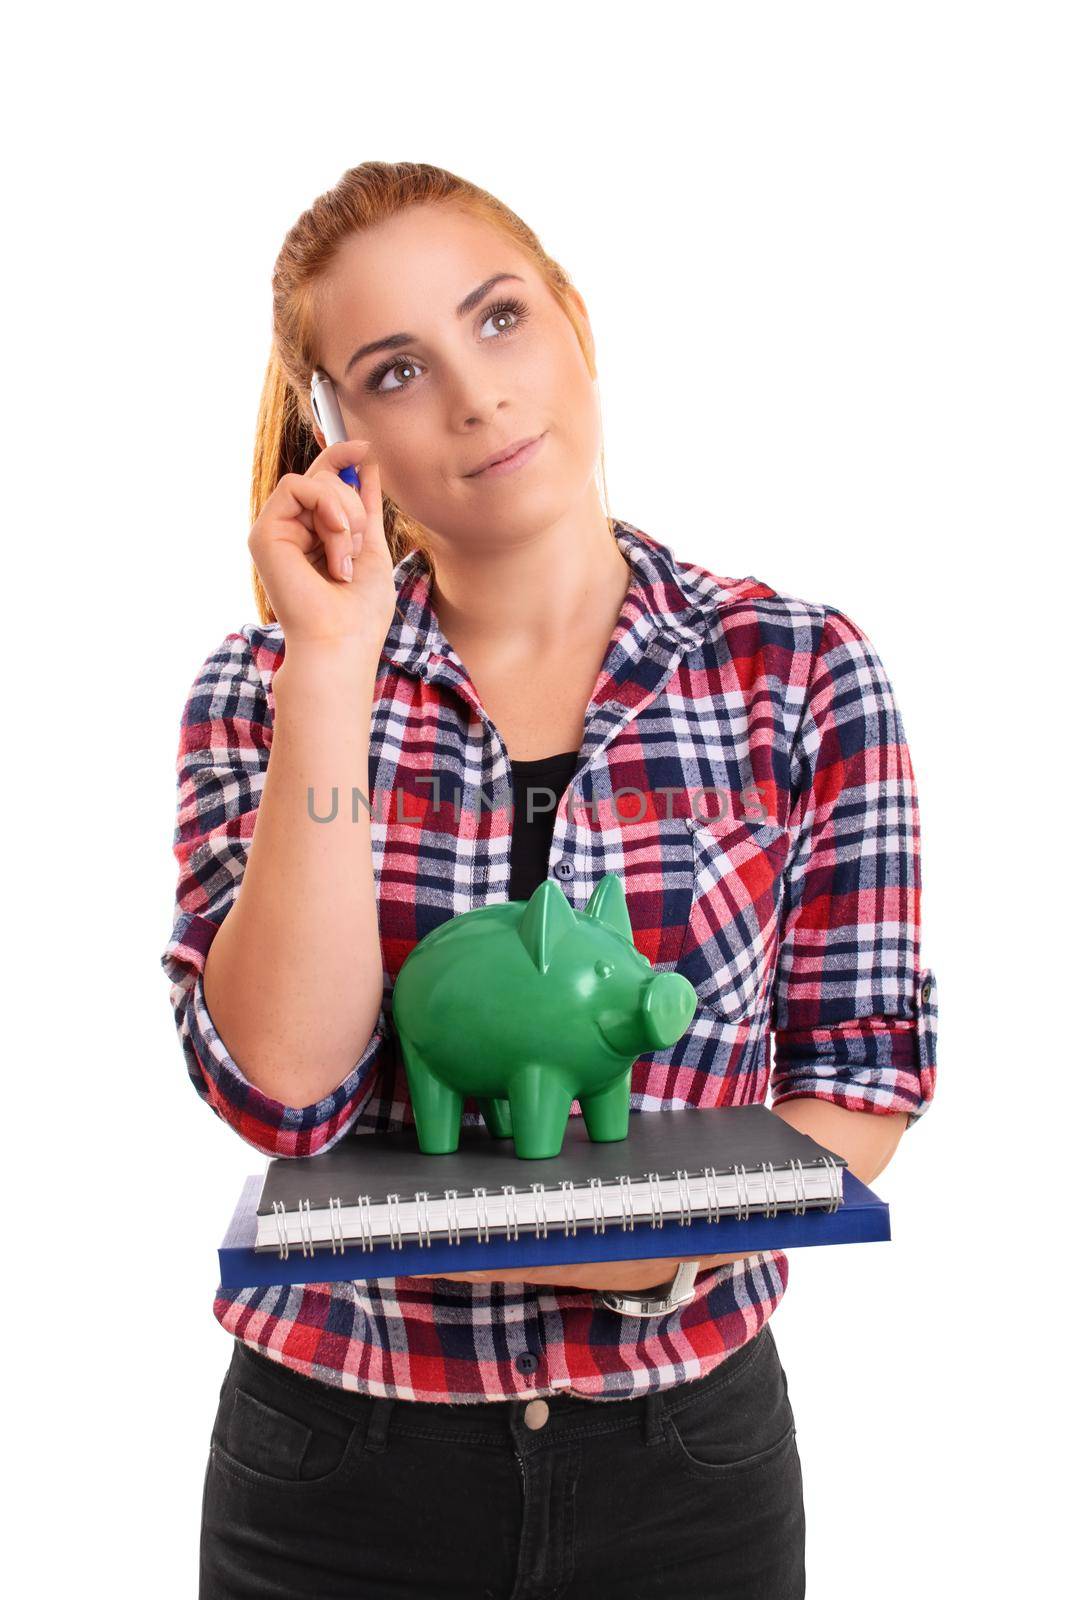 Young female student holding a green piggy bank on a stack of books, thinking with a pen on forehead, isolated on white background. Finance, banking, loan, savings concept.